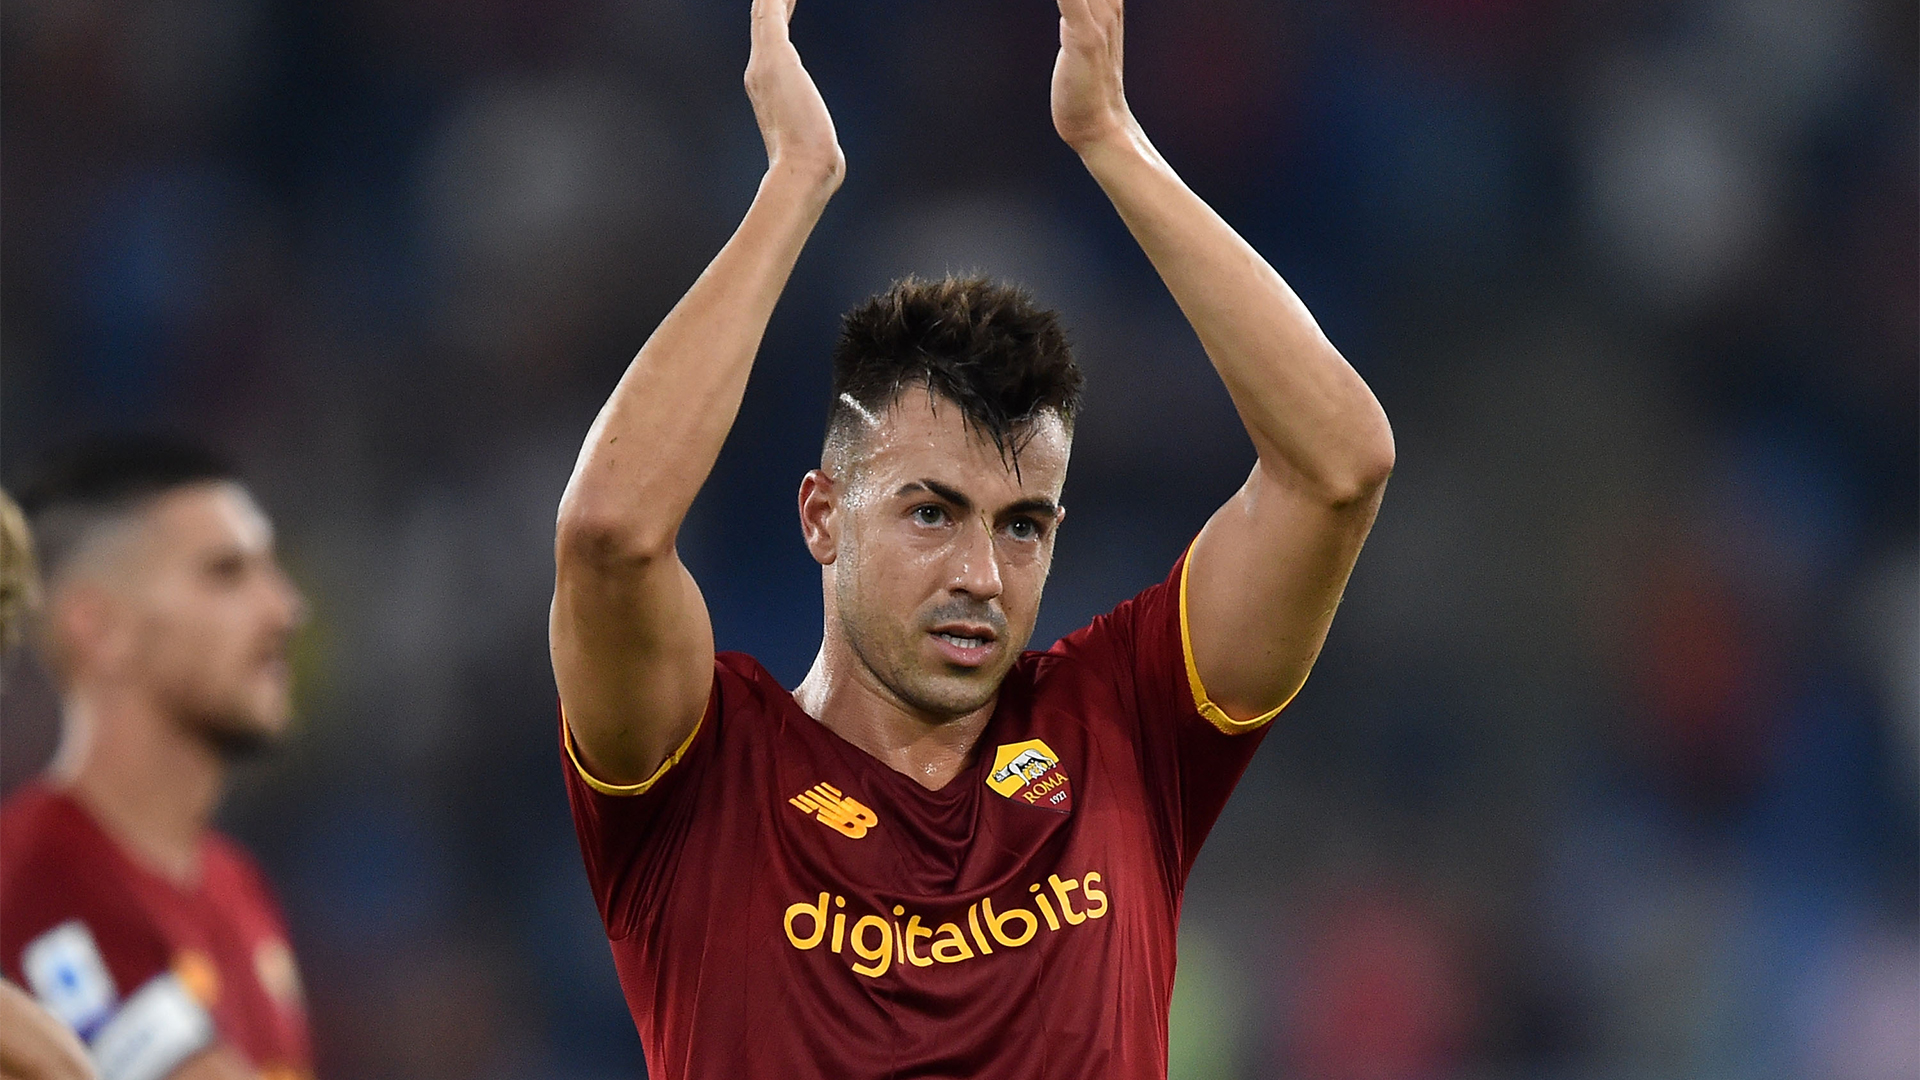 Stephan El Shaarawy has proven to be a valuable contributor this season thanks to his versatility and effectiveness, but his contract is expiring.